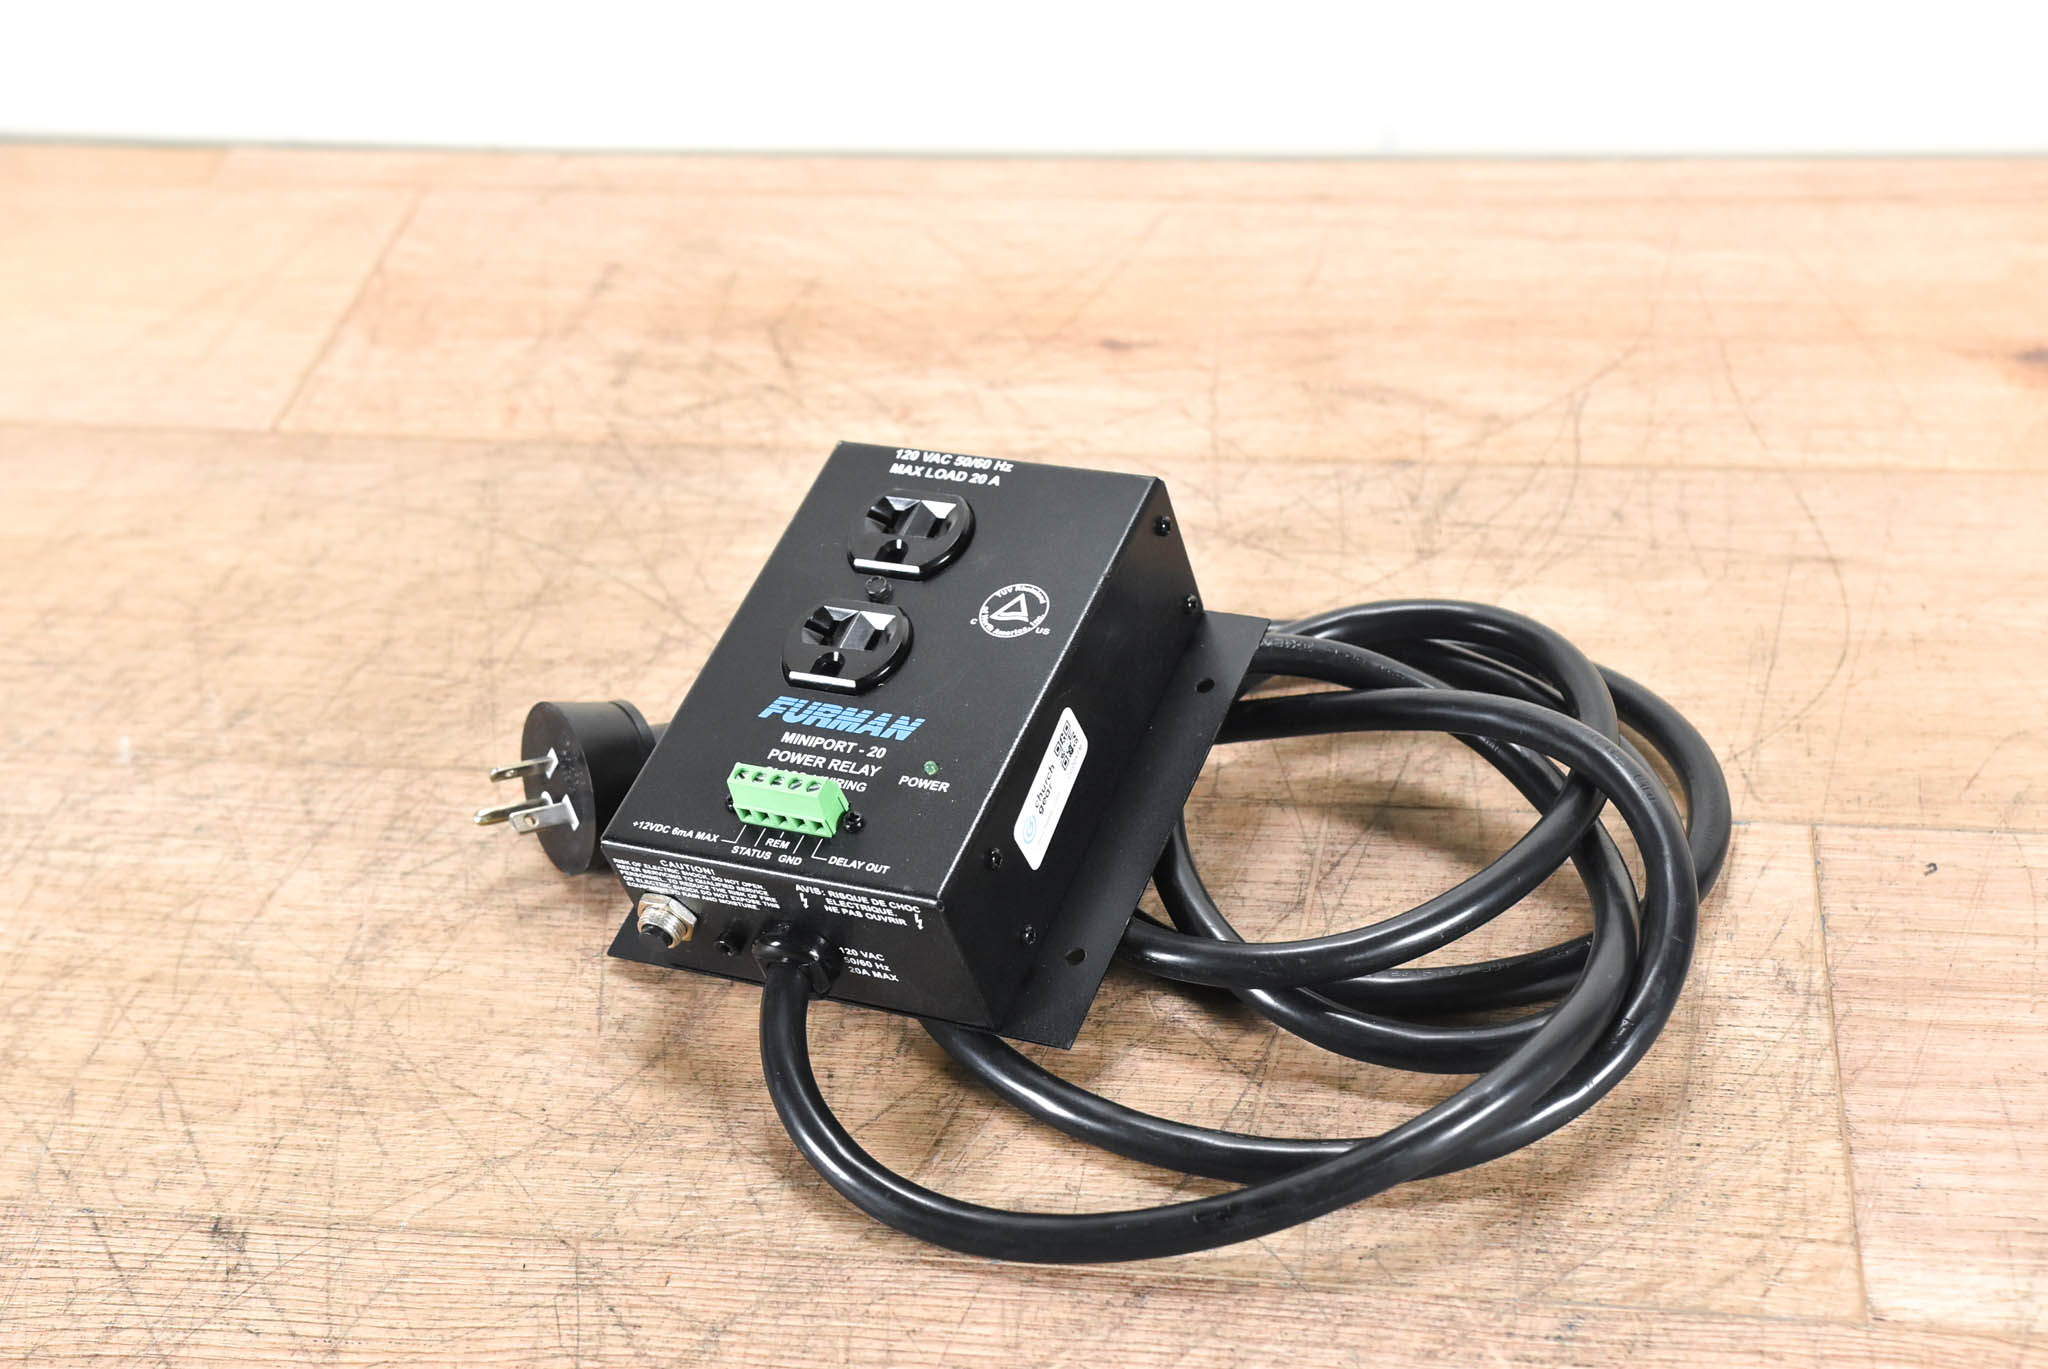 Furman MP-20 Miniport Power Relay Outlet